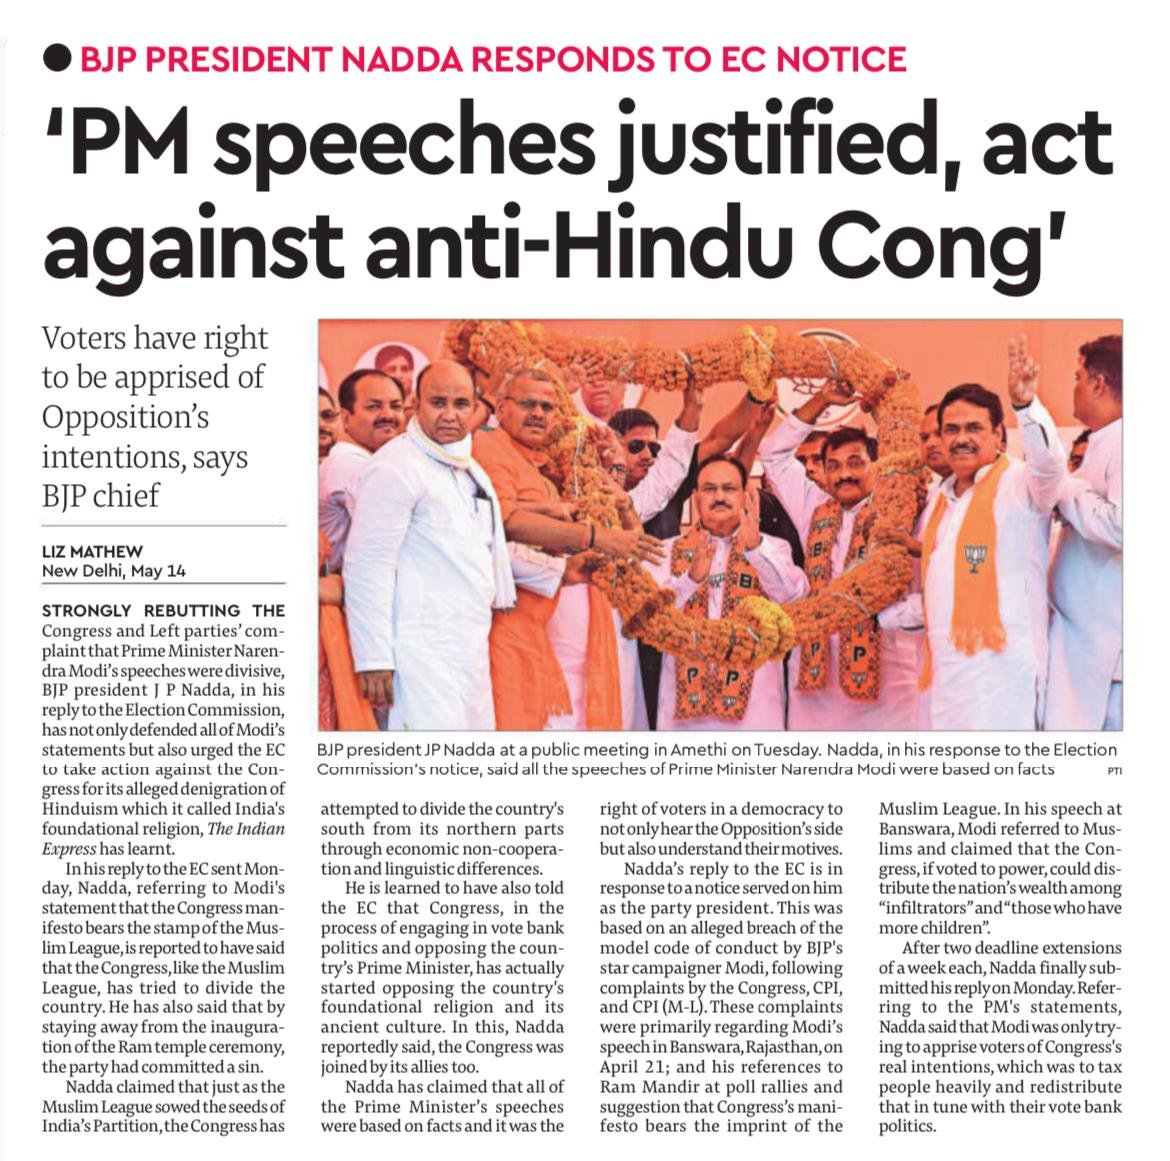 If Mr Modi claims that he didn't say it, then what is Mr Nadda justifying. Why is he explaining that Mr Modi's words against Muslims were justified? [More accurate headline: Nadda justifies what Modi claims he never said about Indian Muslims]